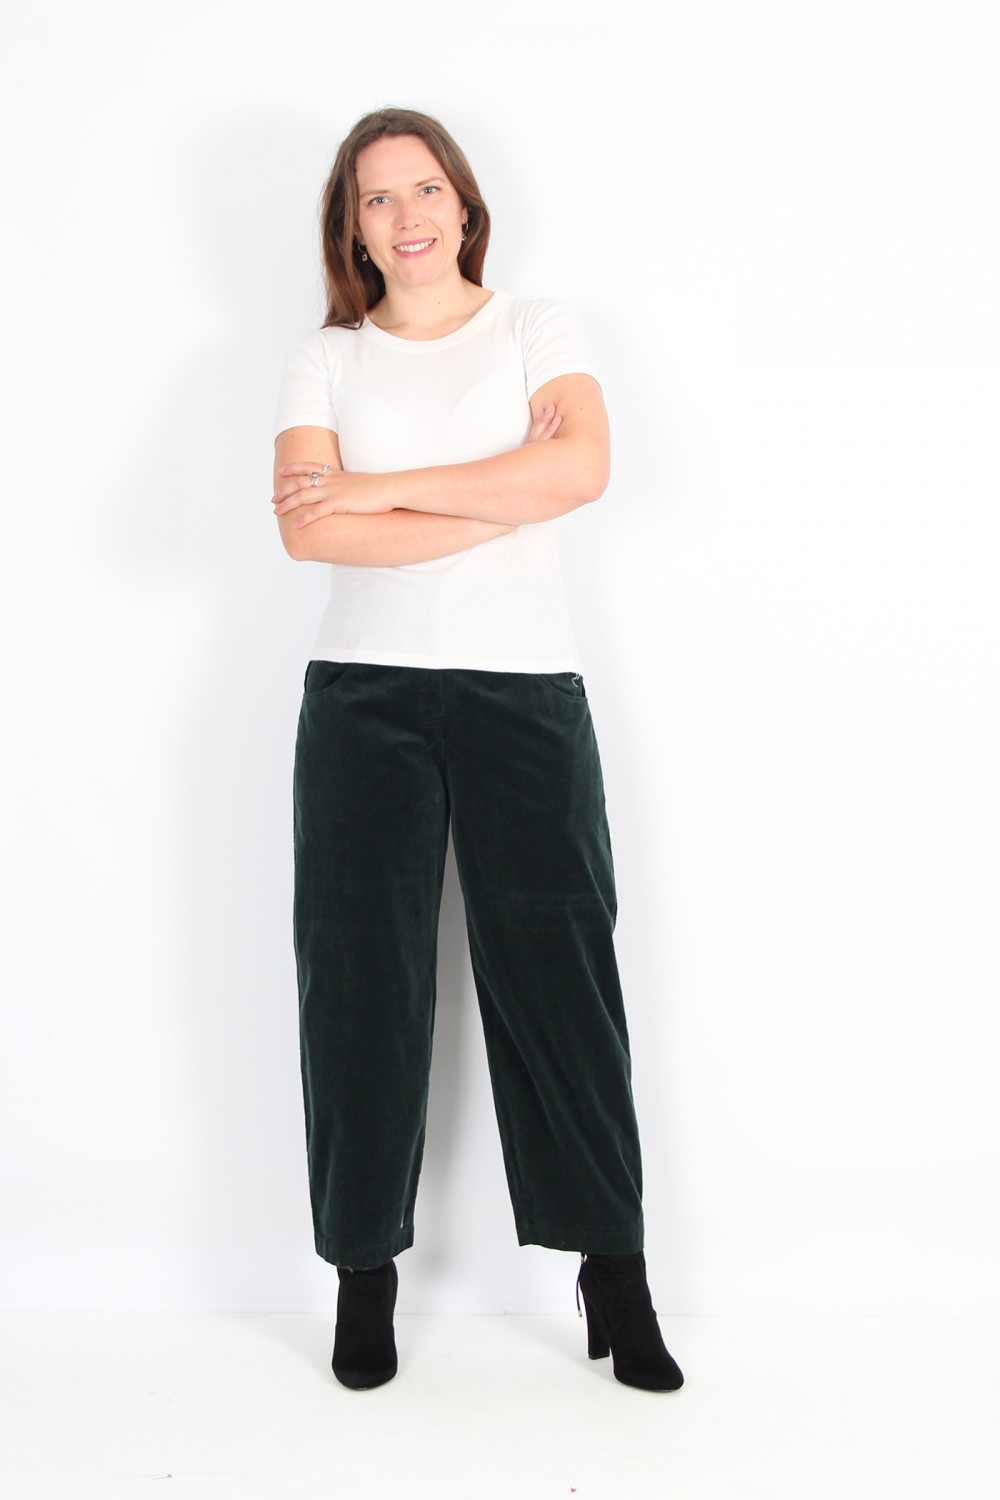 OSKA Trousers Kahren 314 Pond / Cotton Cord With Stretch Content